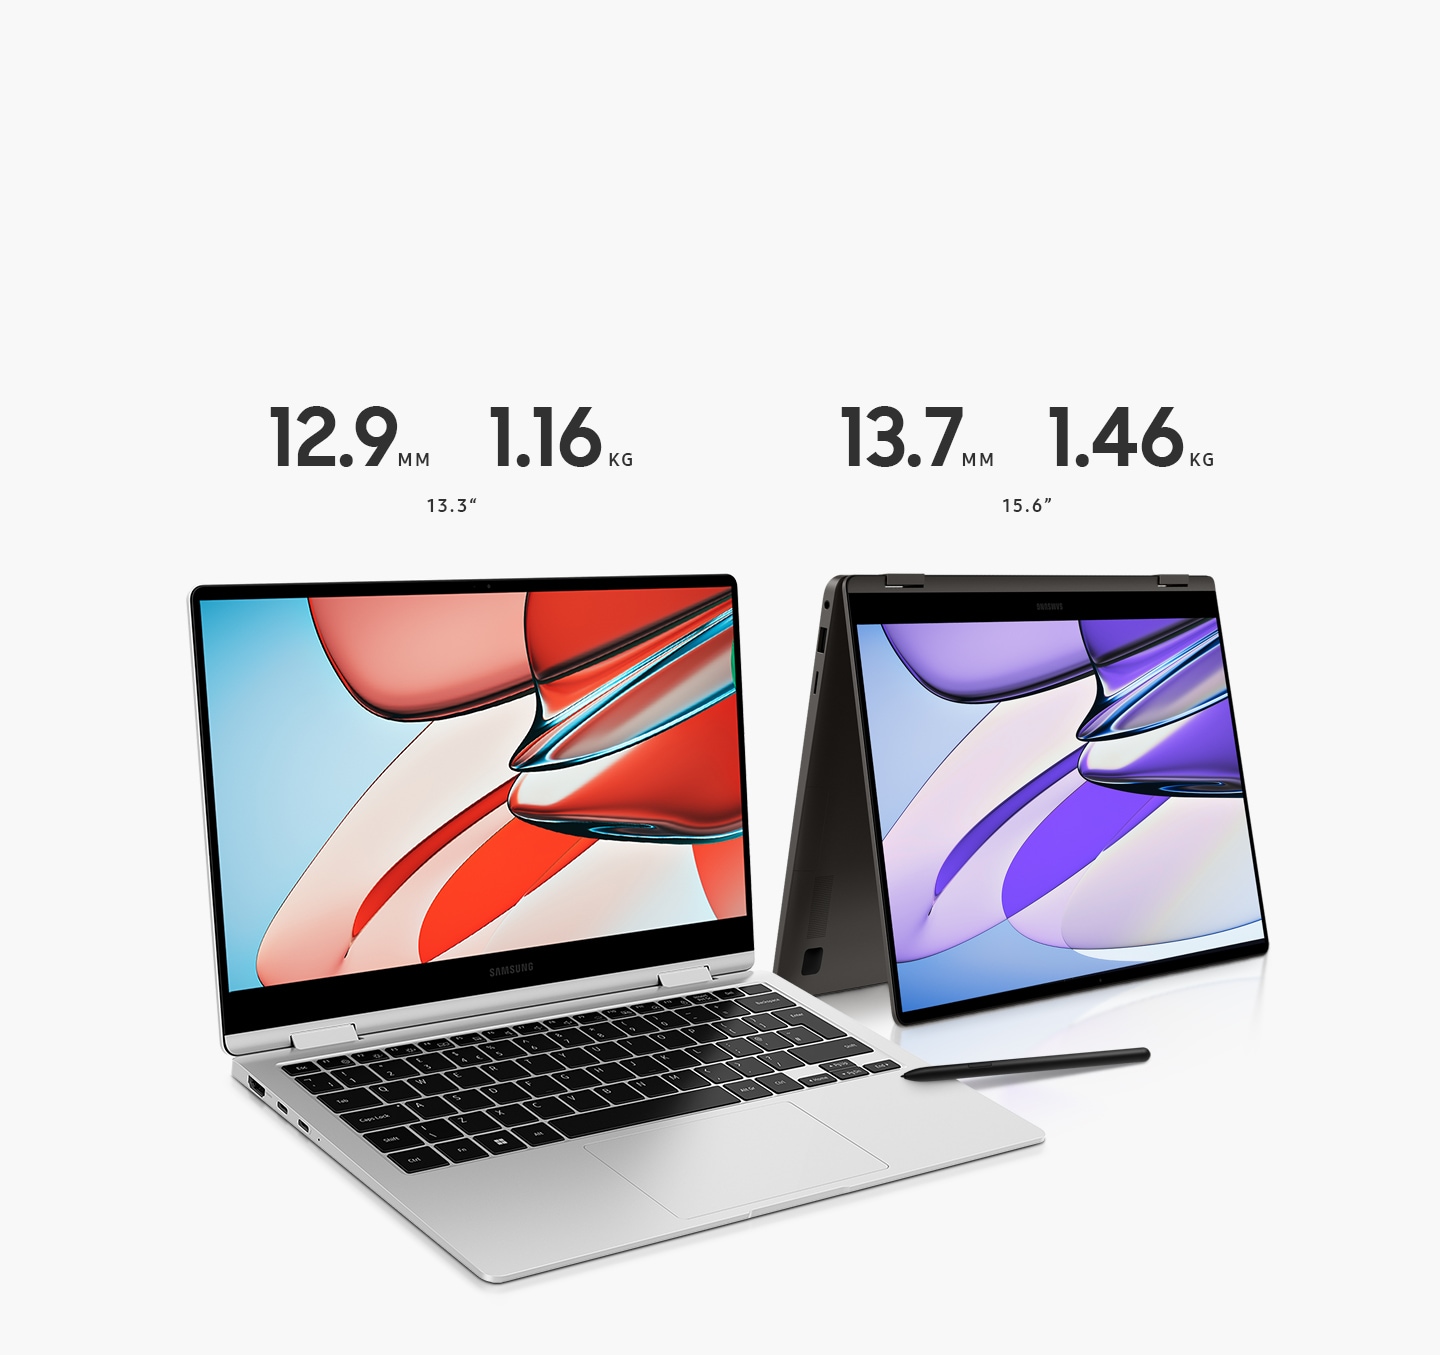 Two Galaxy Book3 360 devices are placed next to each other, opened towards the right side. The one on the left is a silver-colored Galaxy Book3 360 13 inch, with red and pink wallpaper onscreen. 12.9MM, 1.16KG, 13.3"". The one on the right side is a graphite-colored Galaxy Book3 360 15 inch, set in tent mode. 13.7MM, 1.46KG, 15.6"". An S Pen placed on the floor.